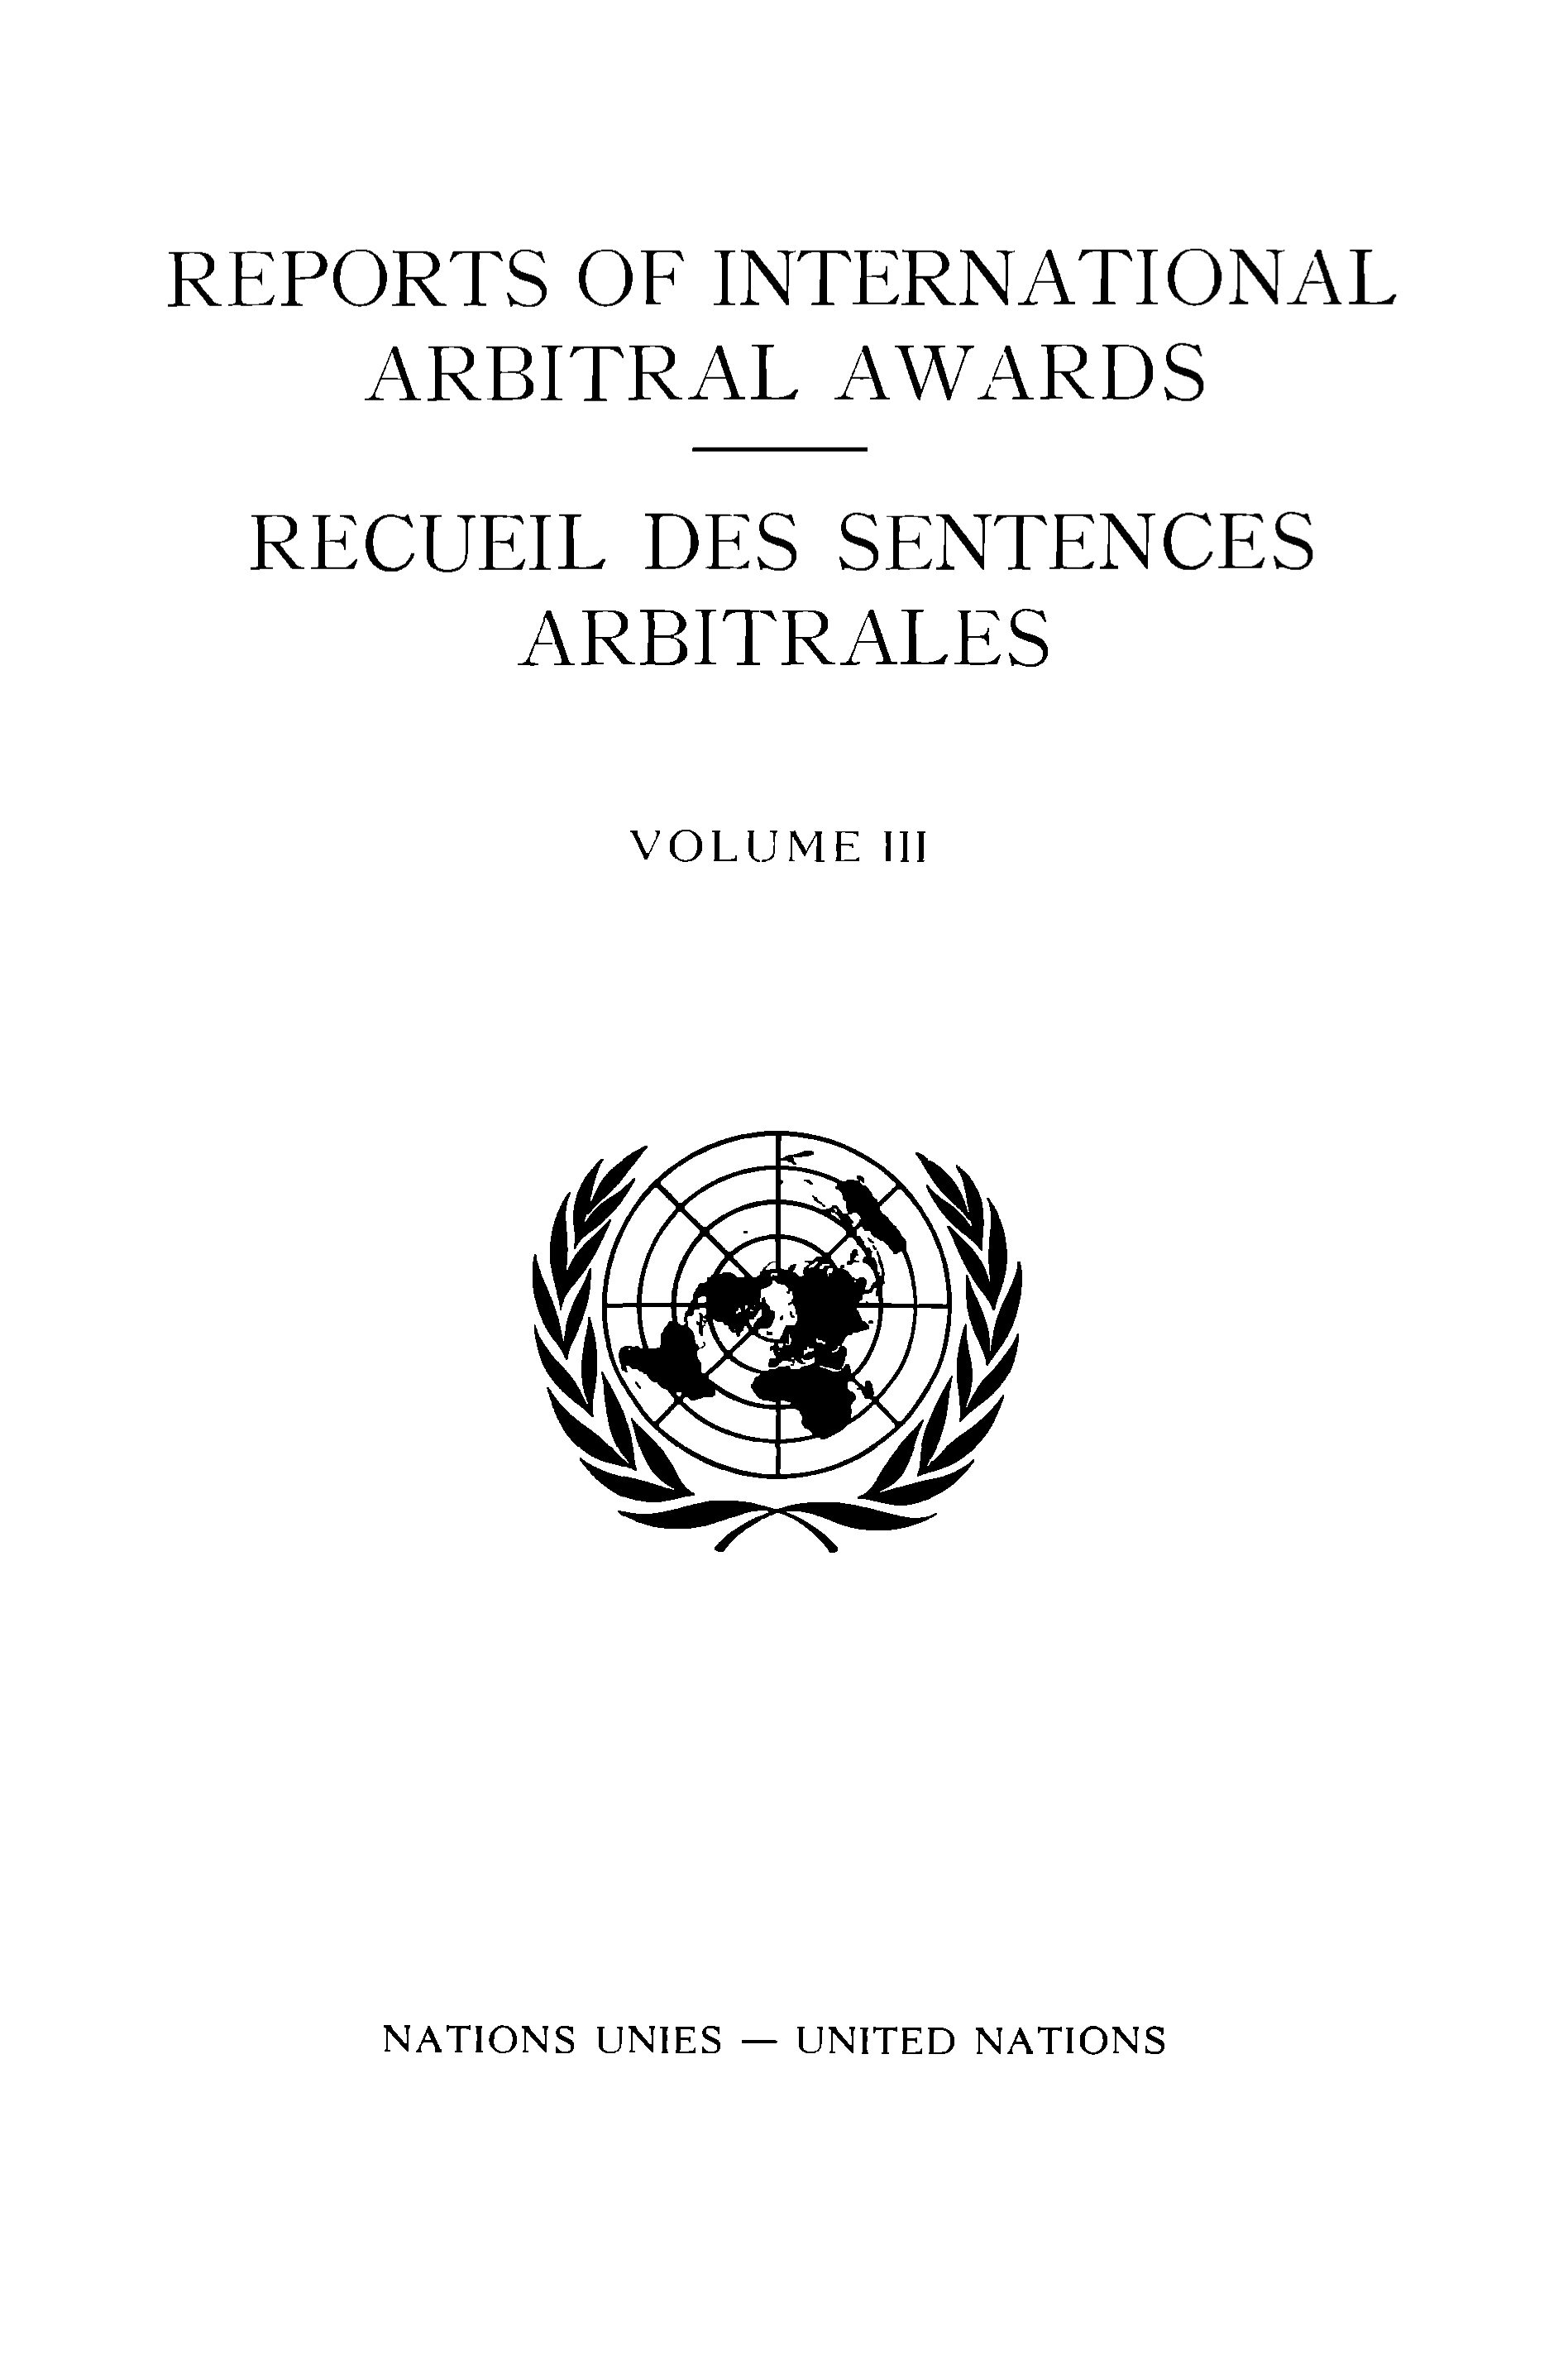 image of Reports of International Arbitral Awards, Vol. III